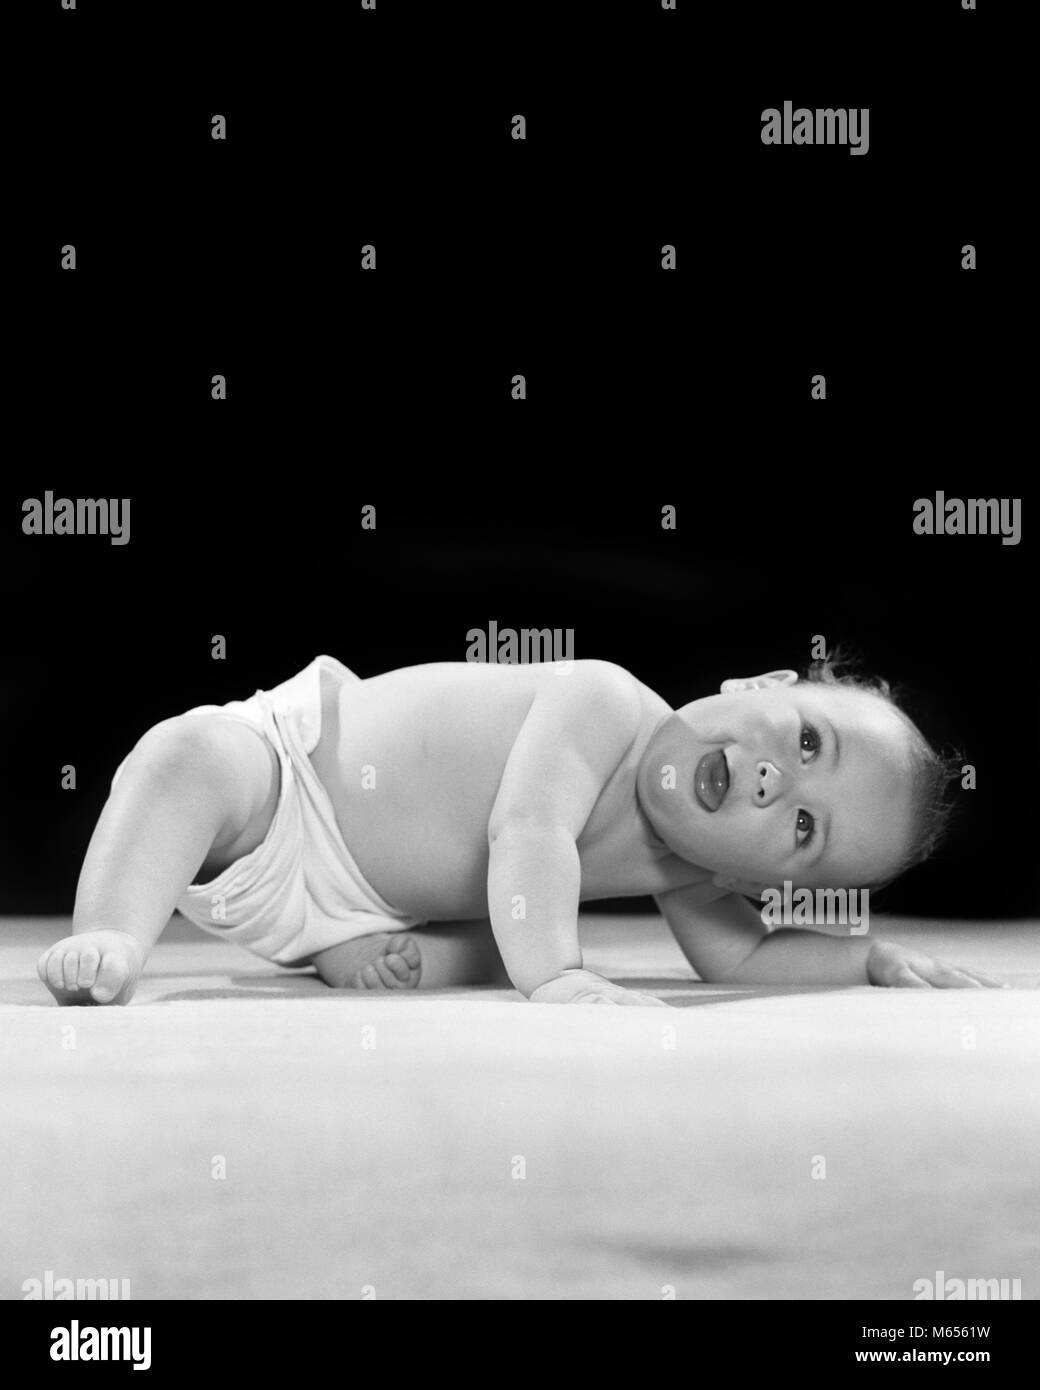 1940s 1950s DIAPERED BABY BENDING DOWN LOOKING UP - b2679 HAR001 HARS JOYFUL BABY BOY 6-12 MONTHS ANGLE JUVENILES LOOKING UP MALES B&W BLACK AND WHITE CAUCASIAN ETHNICITY CLOTH DIAPER DIAPERED LEANING OVER OLD FASHIONED POINT OF VIEW UPSIDE DOWN VANTAGE POINT Stock Photo